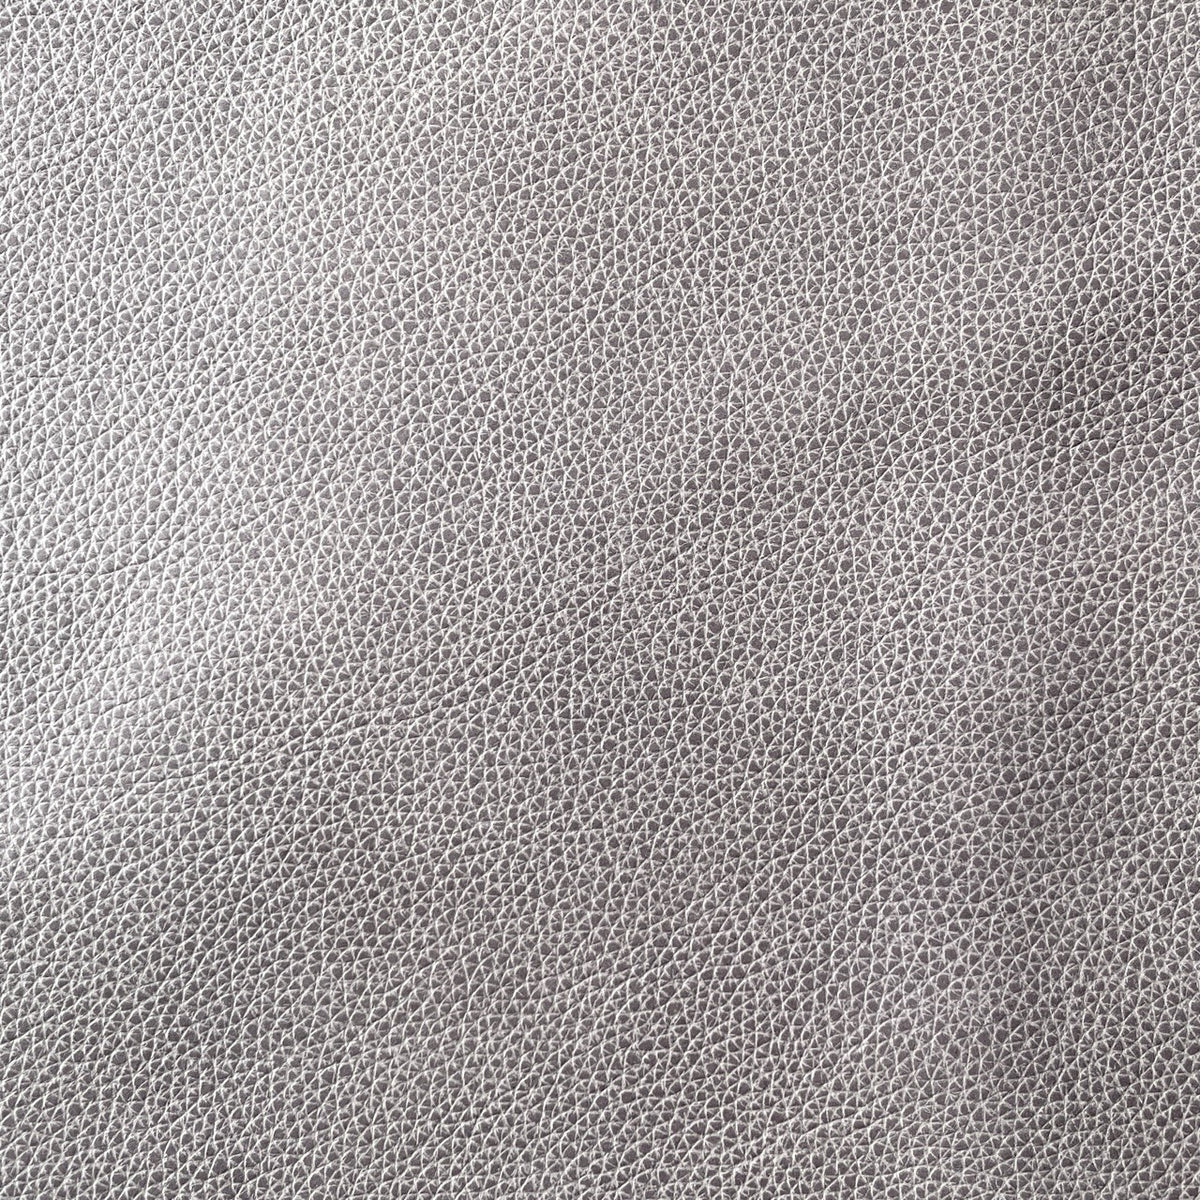 Upholstery Cow Hide #07a | Grey | 1.2mm | 5.23 sq.m | From $390 ea.